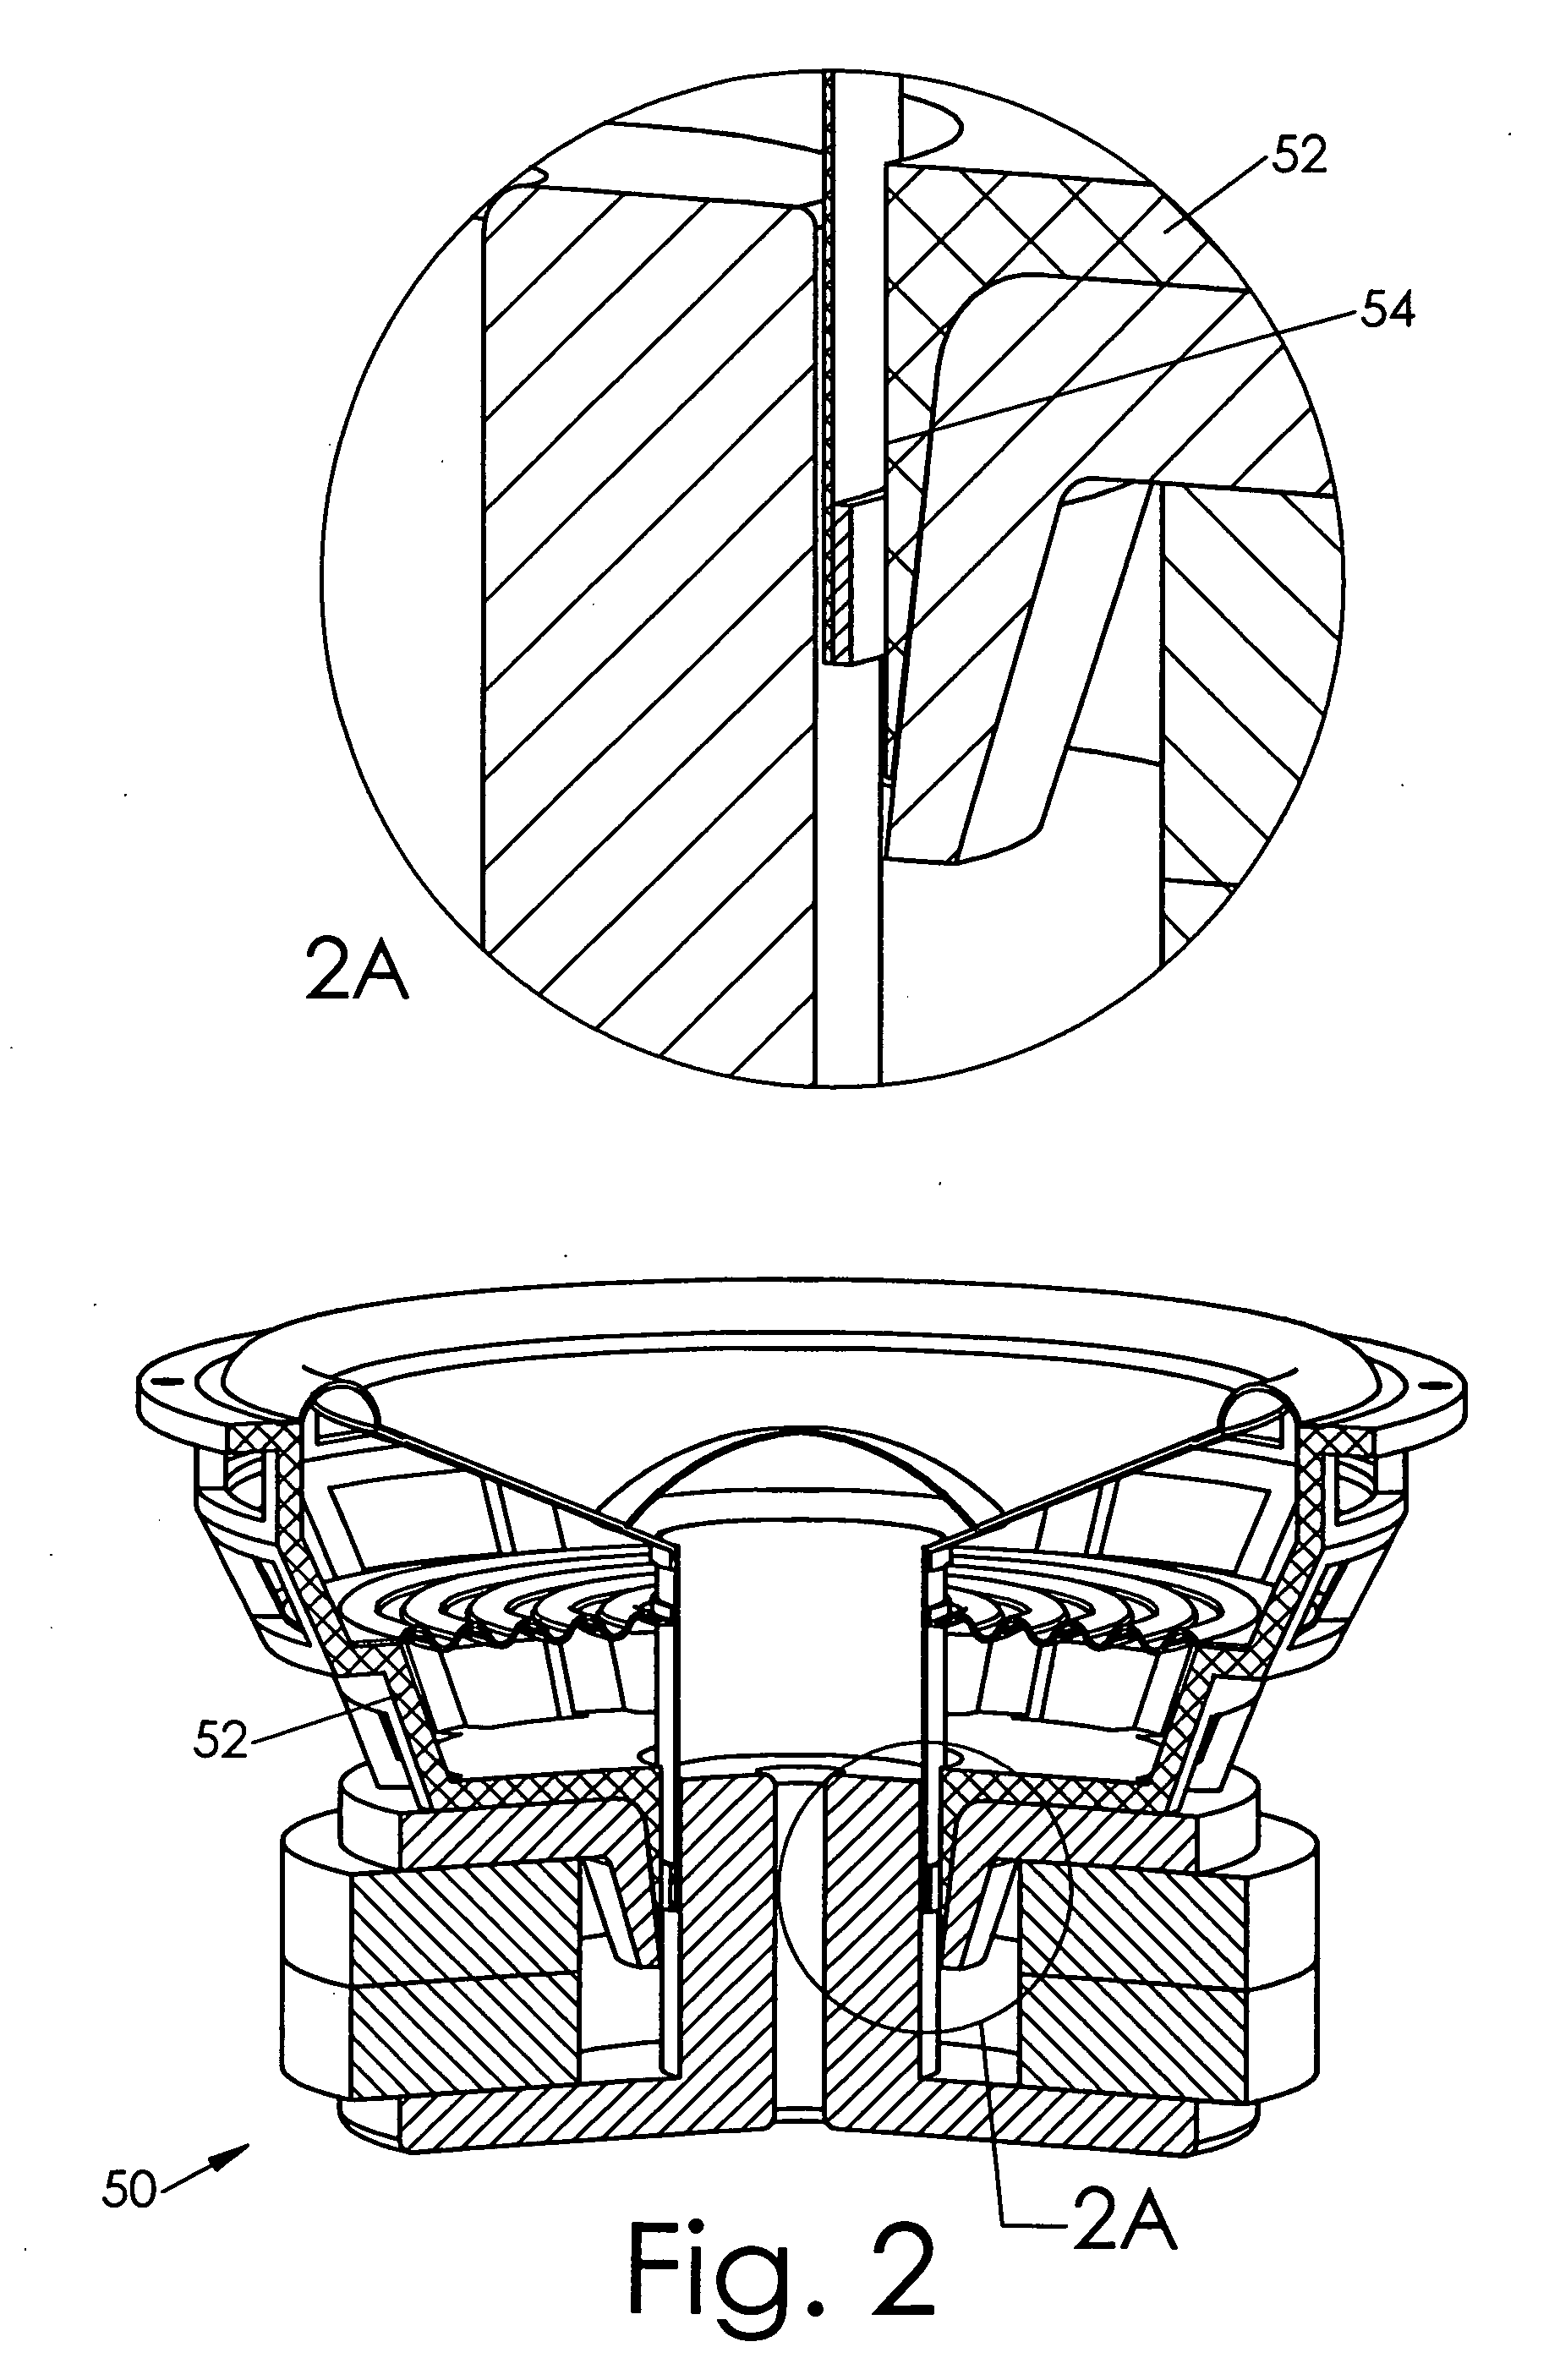 Magnetically tapered air gap for electromagnetic transducer